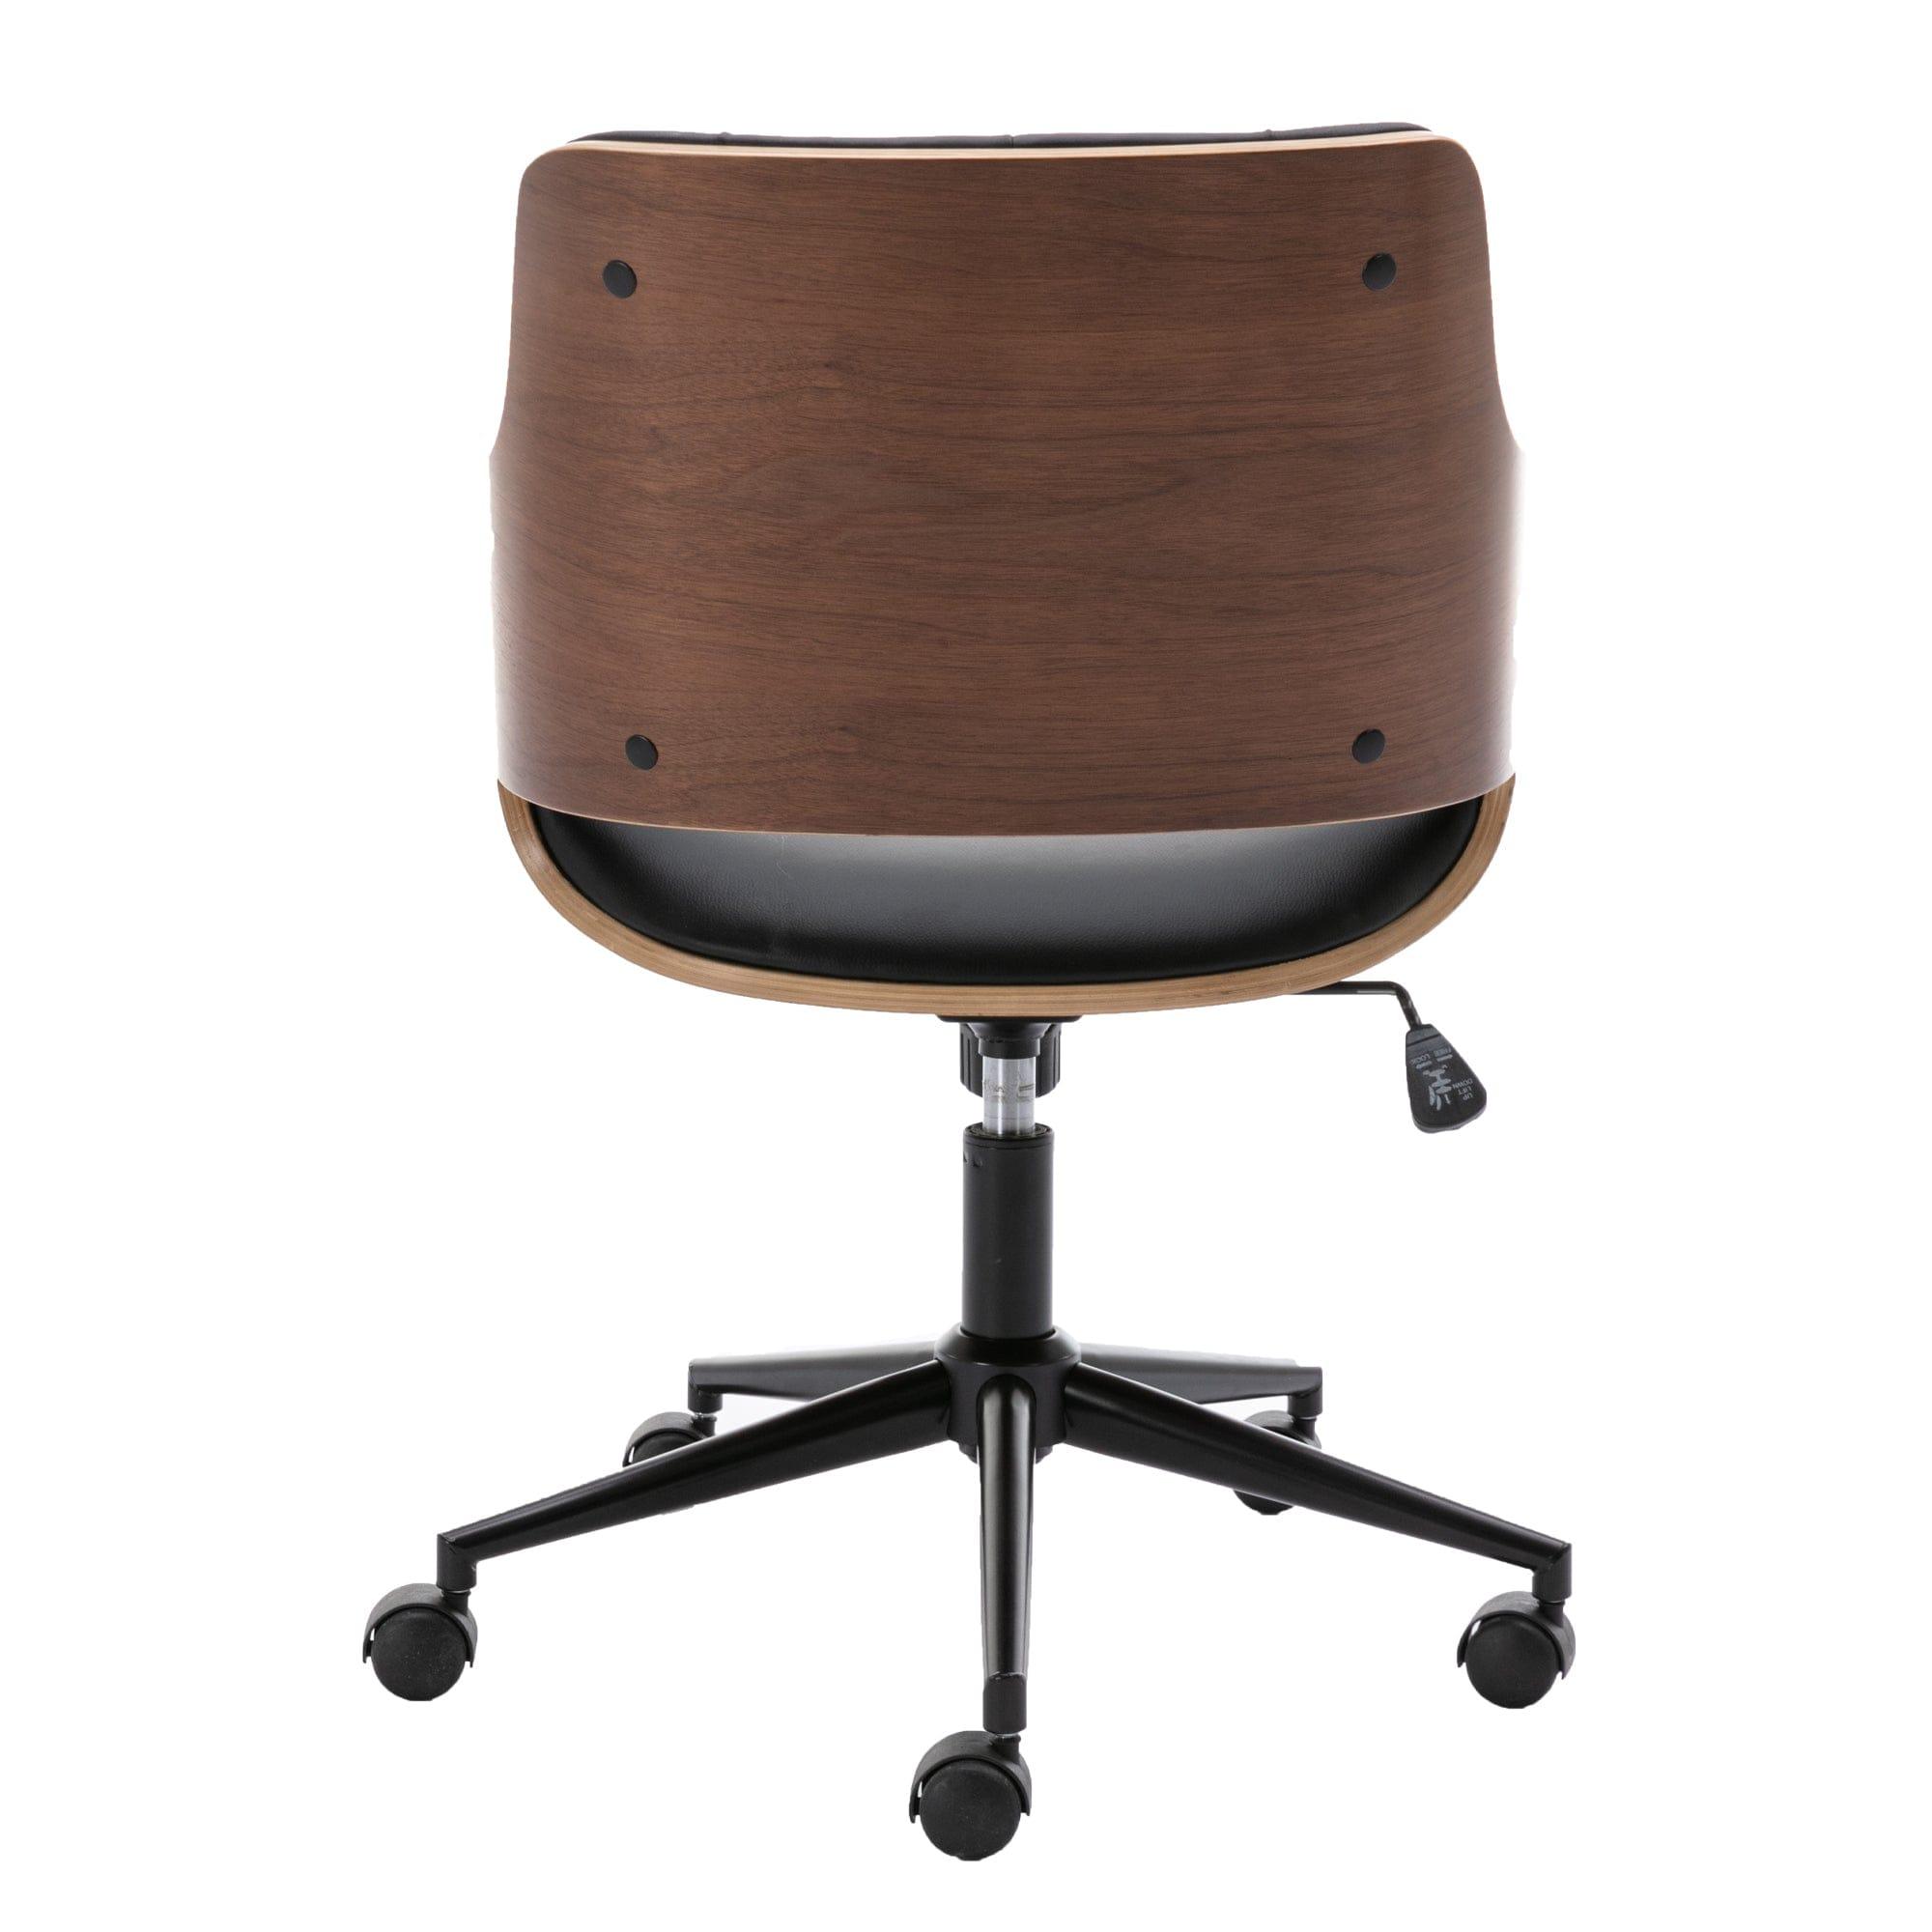 Shop HengMing Bentwood Adjustable Office Chair , black PU Leather Upholstery and black foot Mademoiselle Home Decor